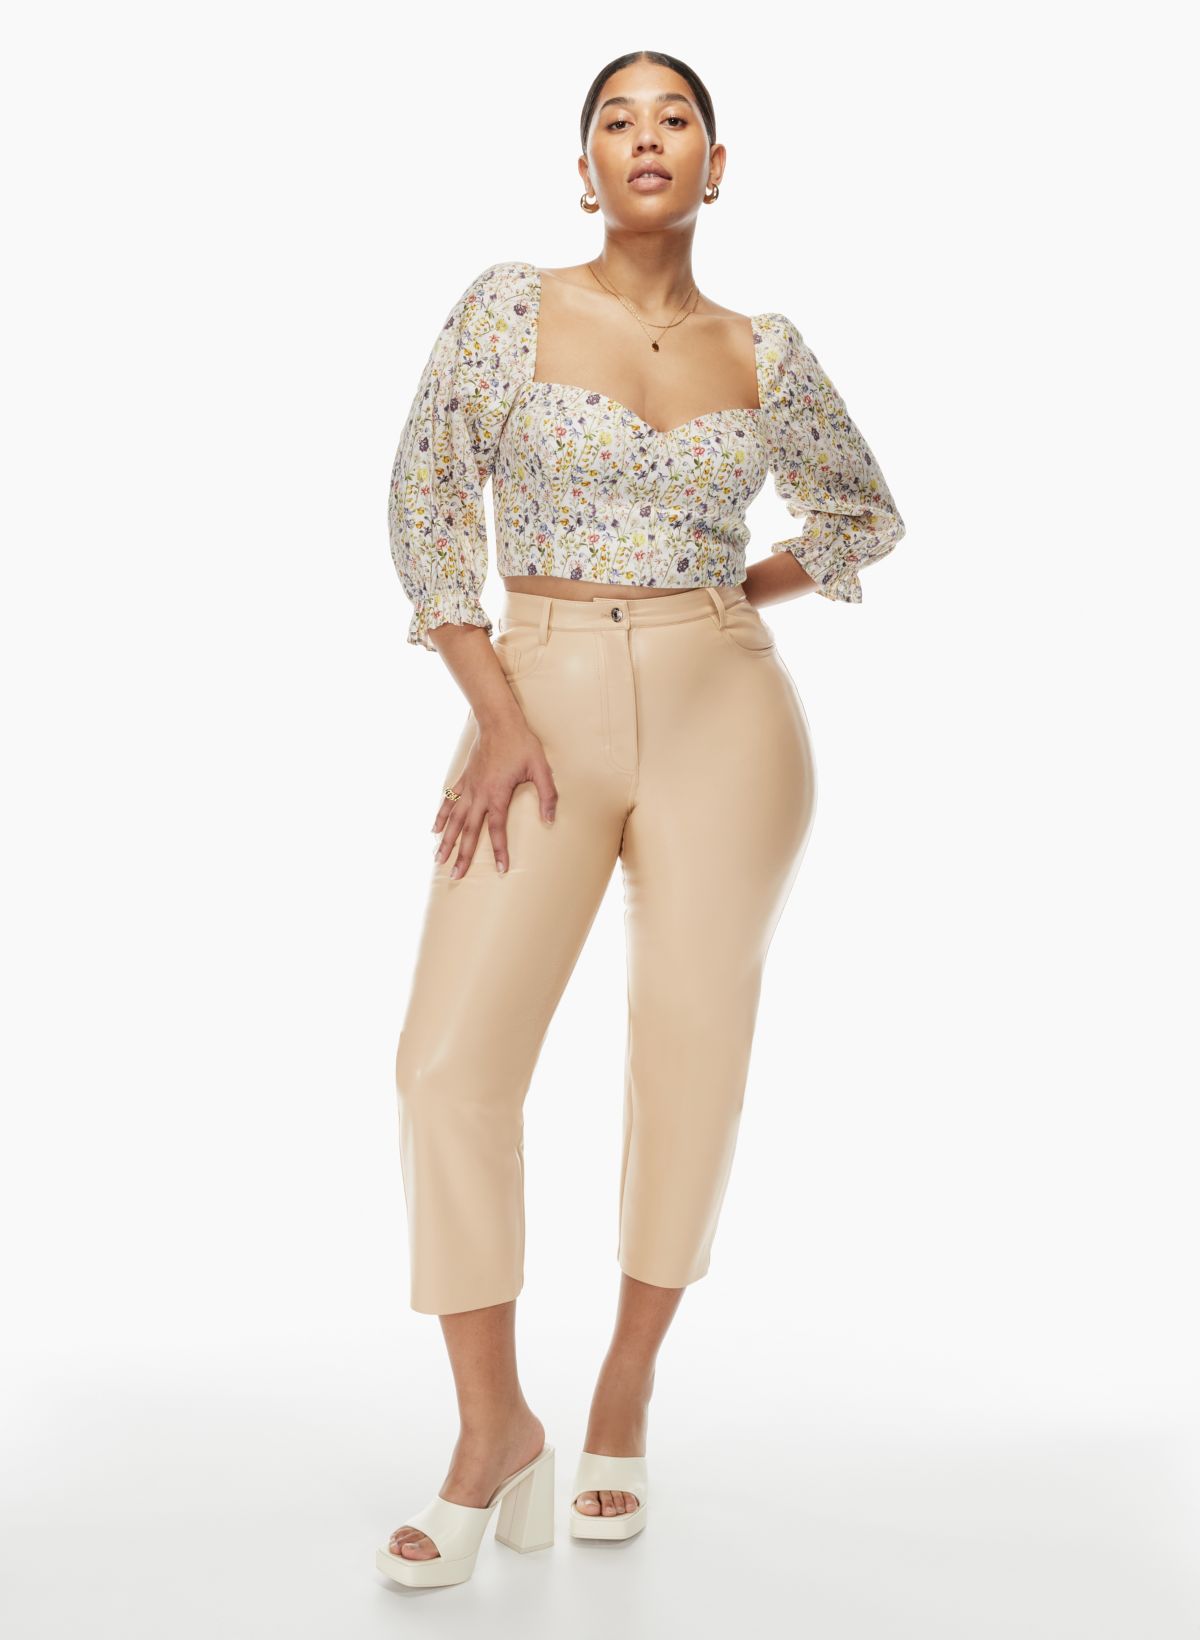 NEW Aritzia Wilfred Melina Pant, Women's Fashion, Clothes on Carousell